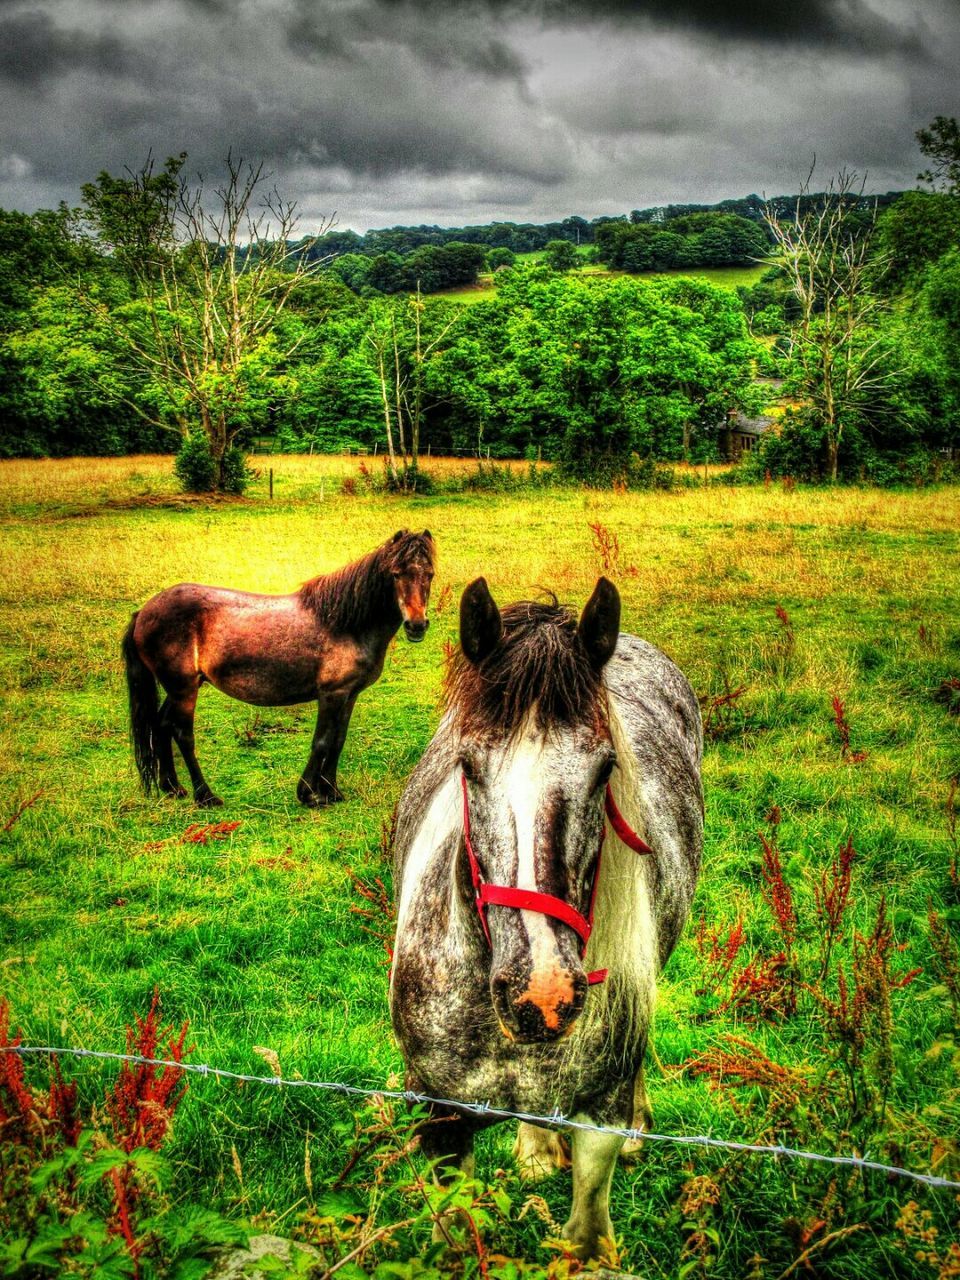 Horses on green field against cloudy sky